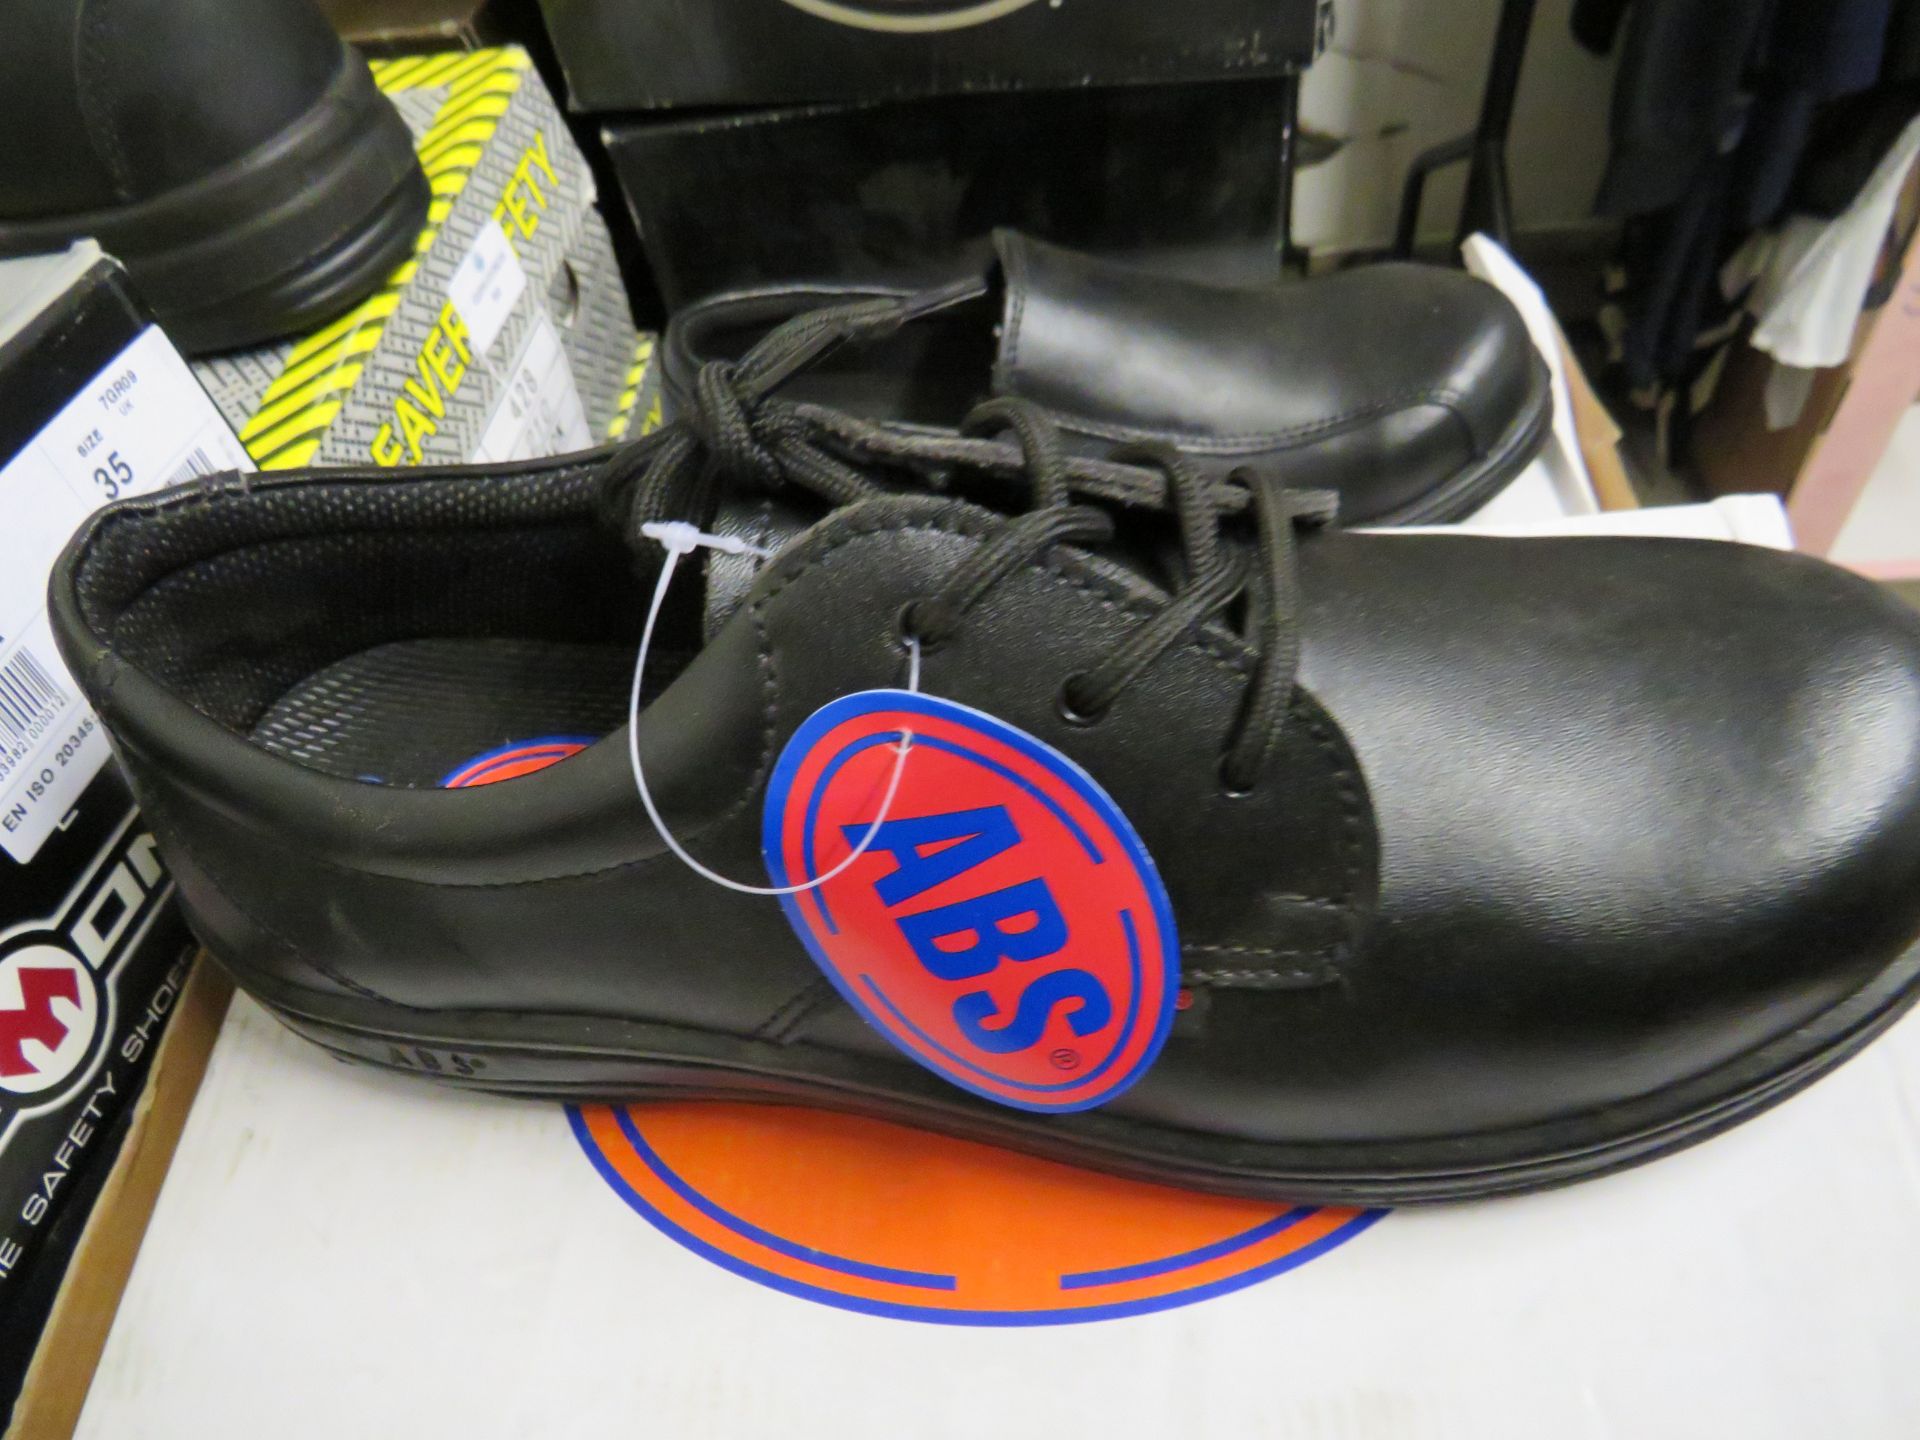 Beaver Safety - Black Leather Steel Toe Cap Shoes - Size 13 - Unused & Boxed.